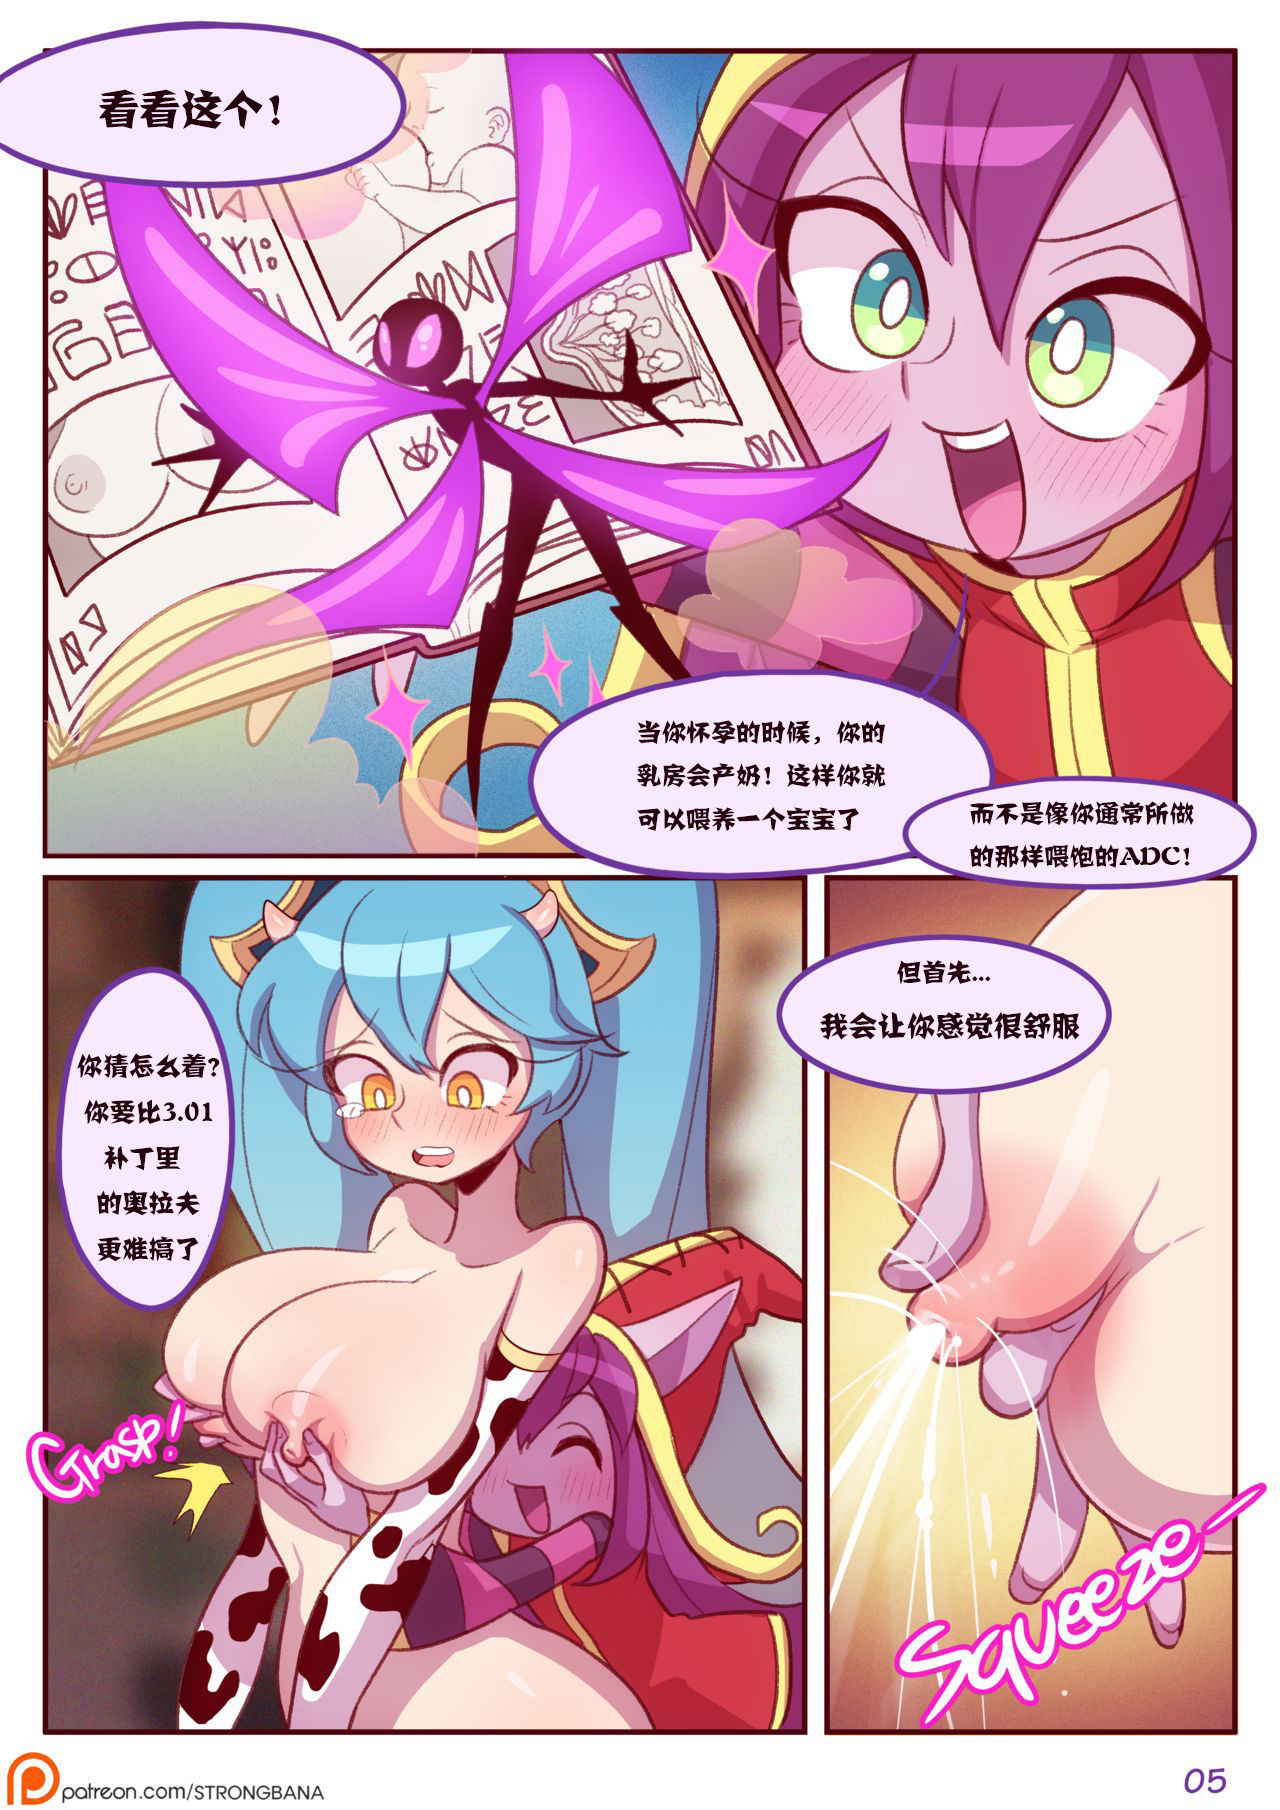 [Strong bana] I Need Some Milk (League of Legends) [Chinese] 